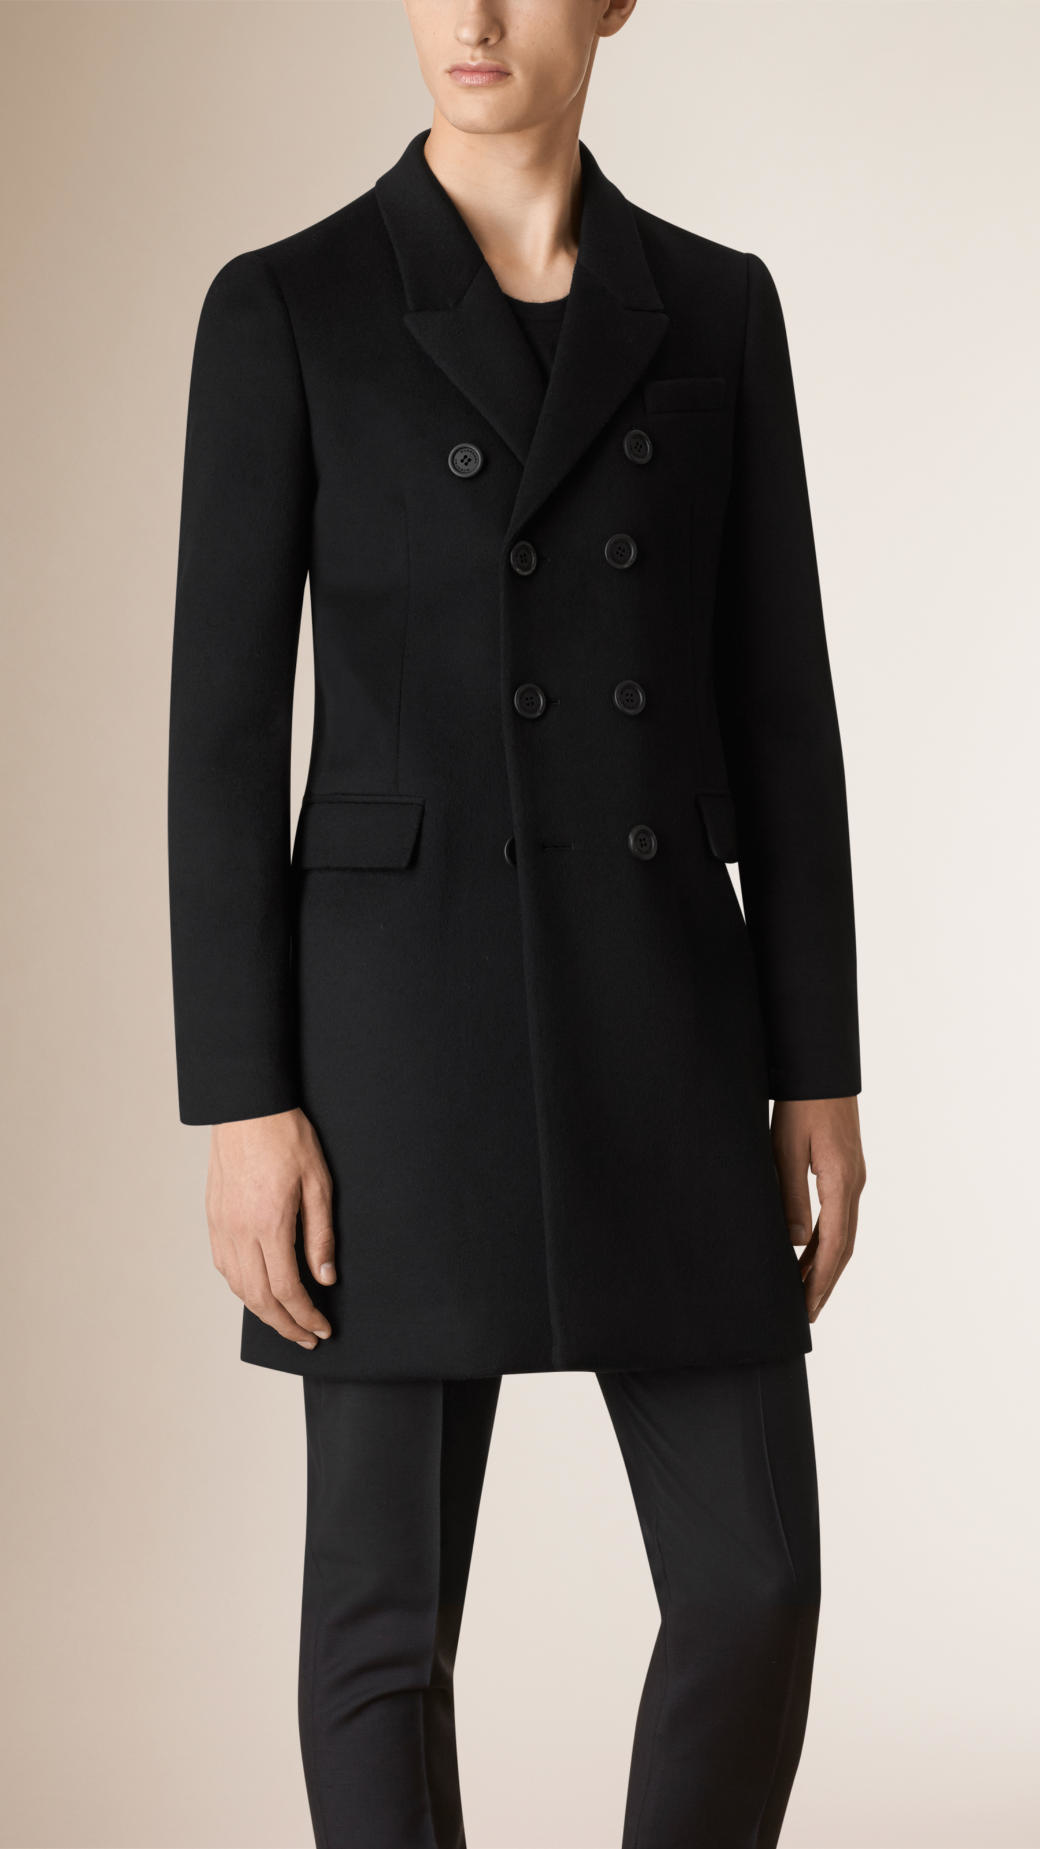 Lyst - Burberry Double-breasted Unlined Cashmere Wool Coat in Black for Men